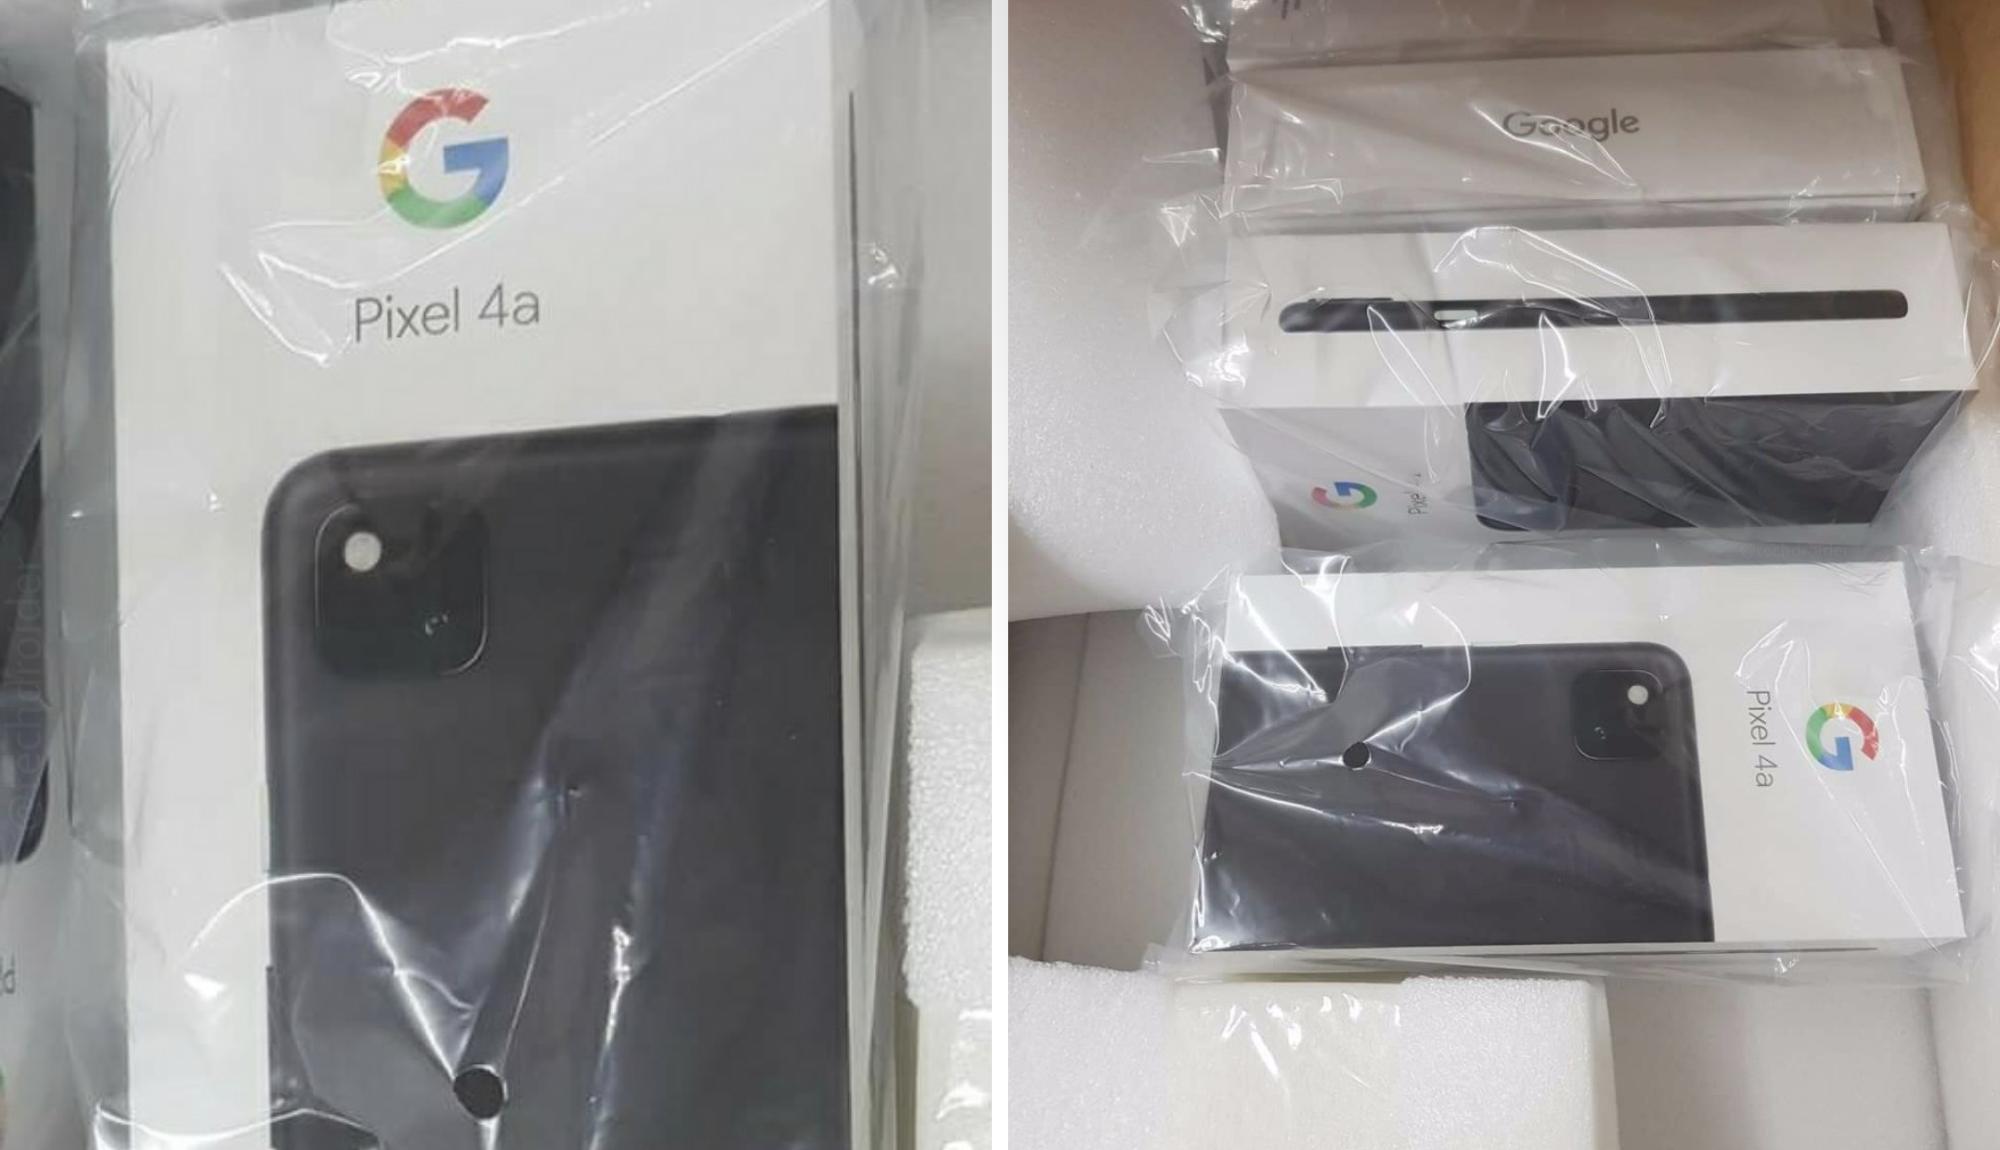 Google Pixel 4a retail packaging leak could mean launch is around the corner